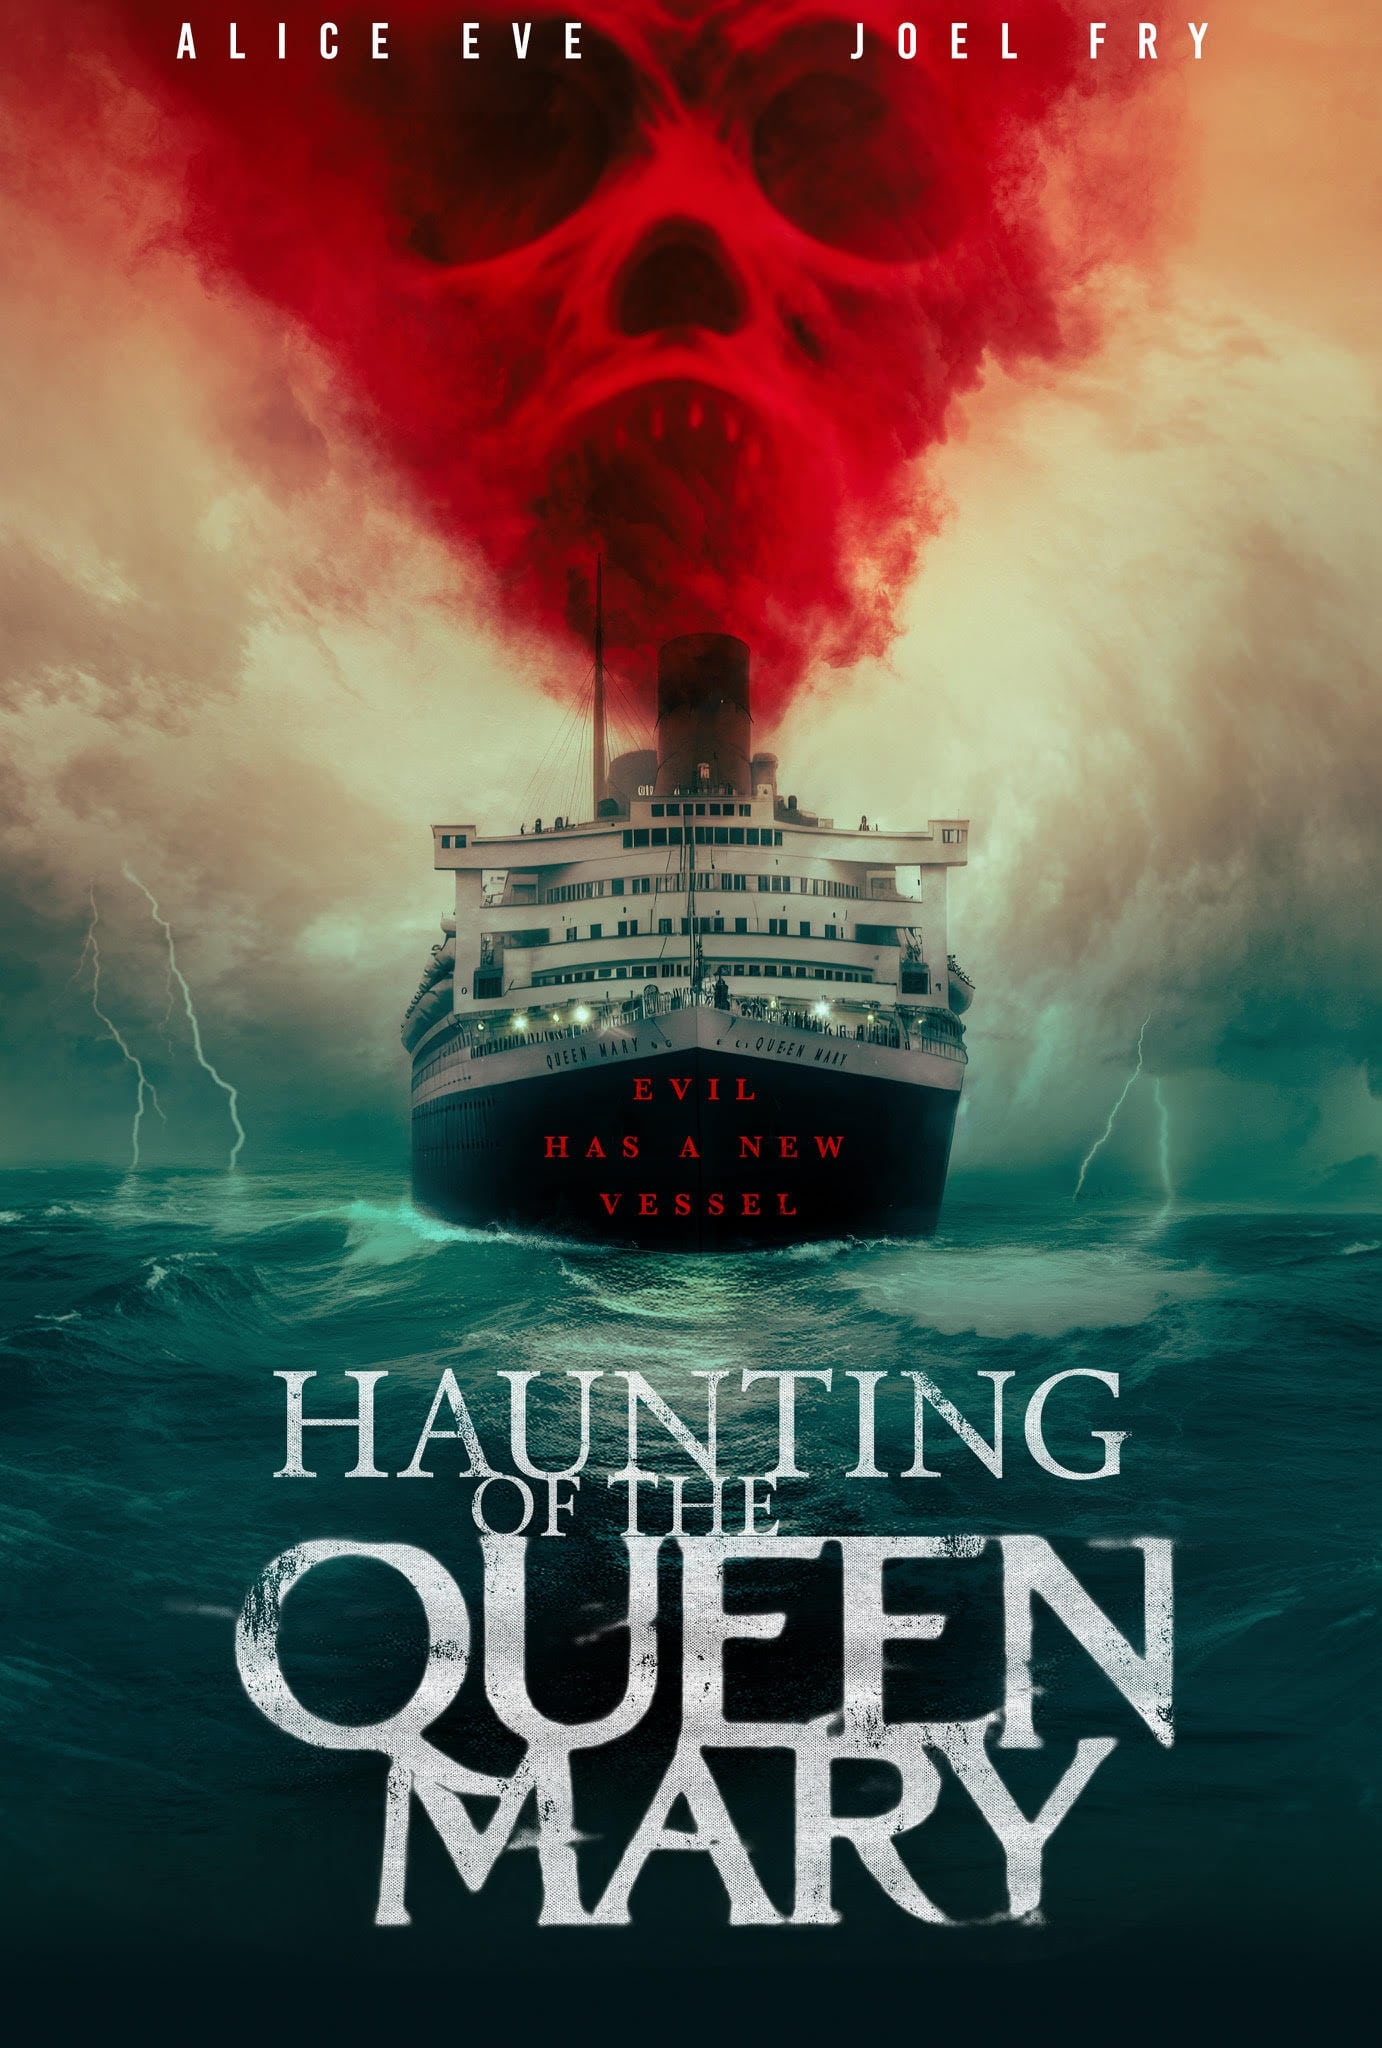 Poster for the movie "Haunting of the Queen Mary"